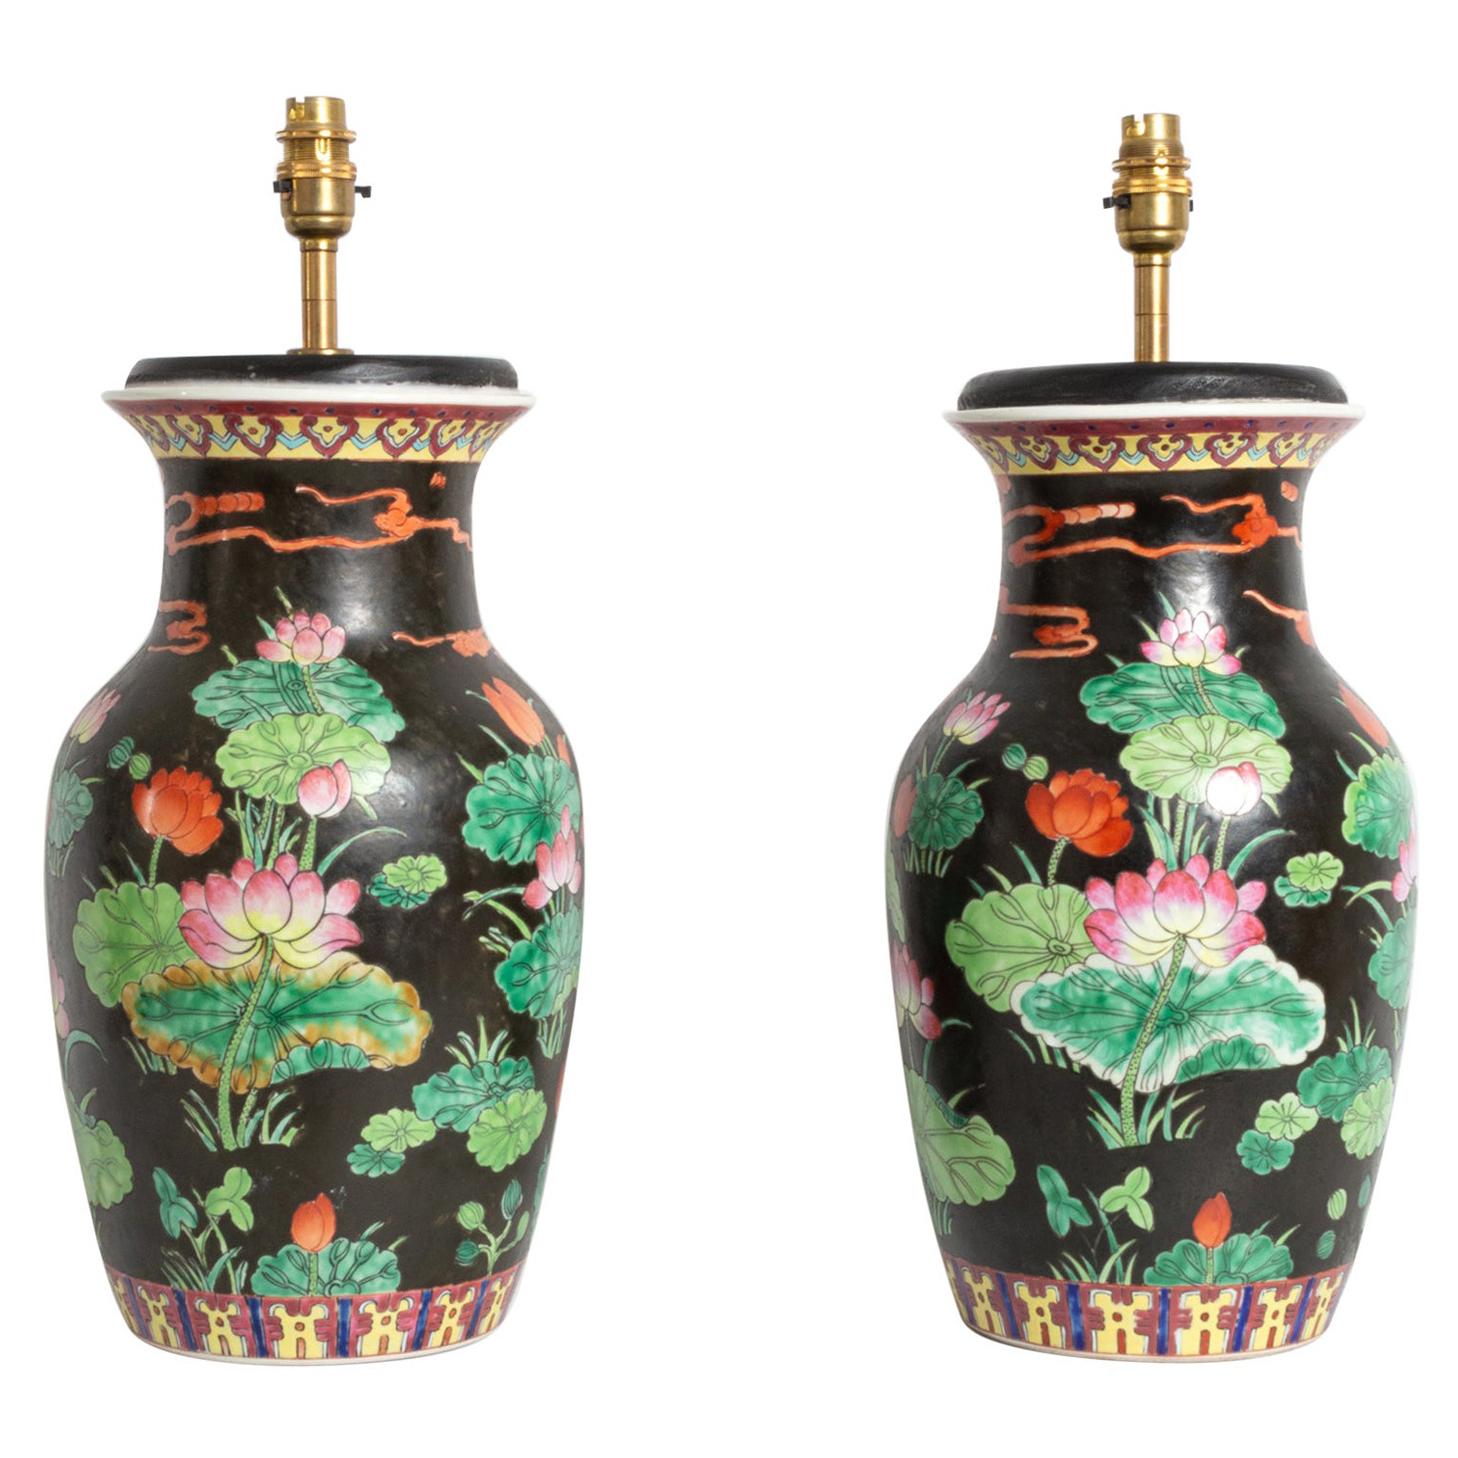 Antique Pair of 19th Century Famille Noire Chinese Vase Lamps, circa 1860